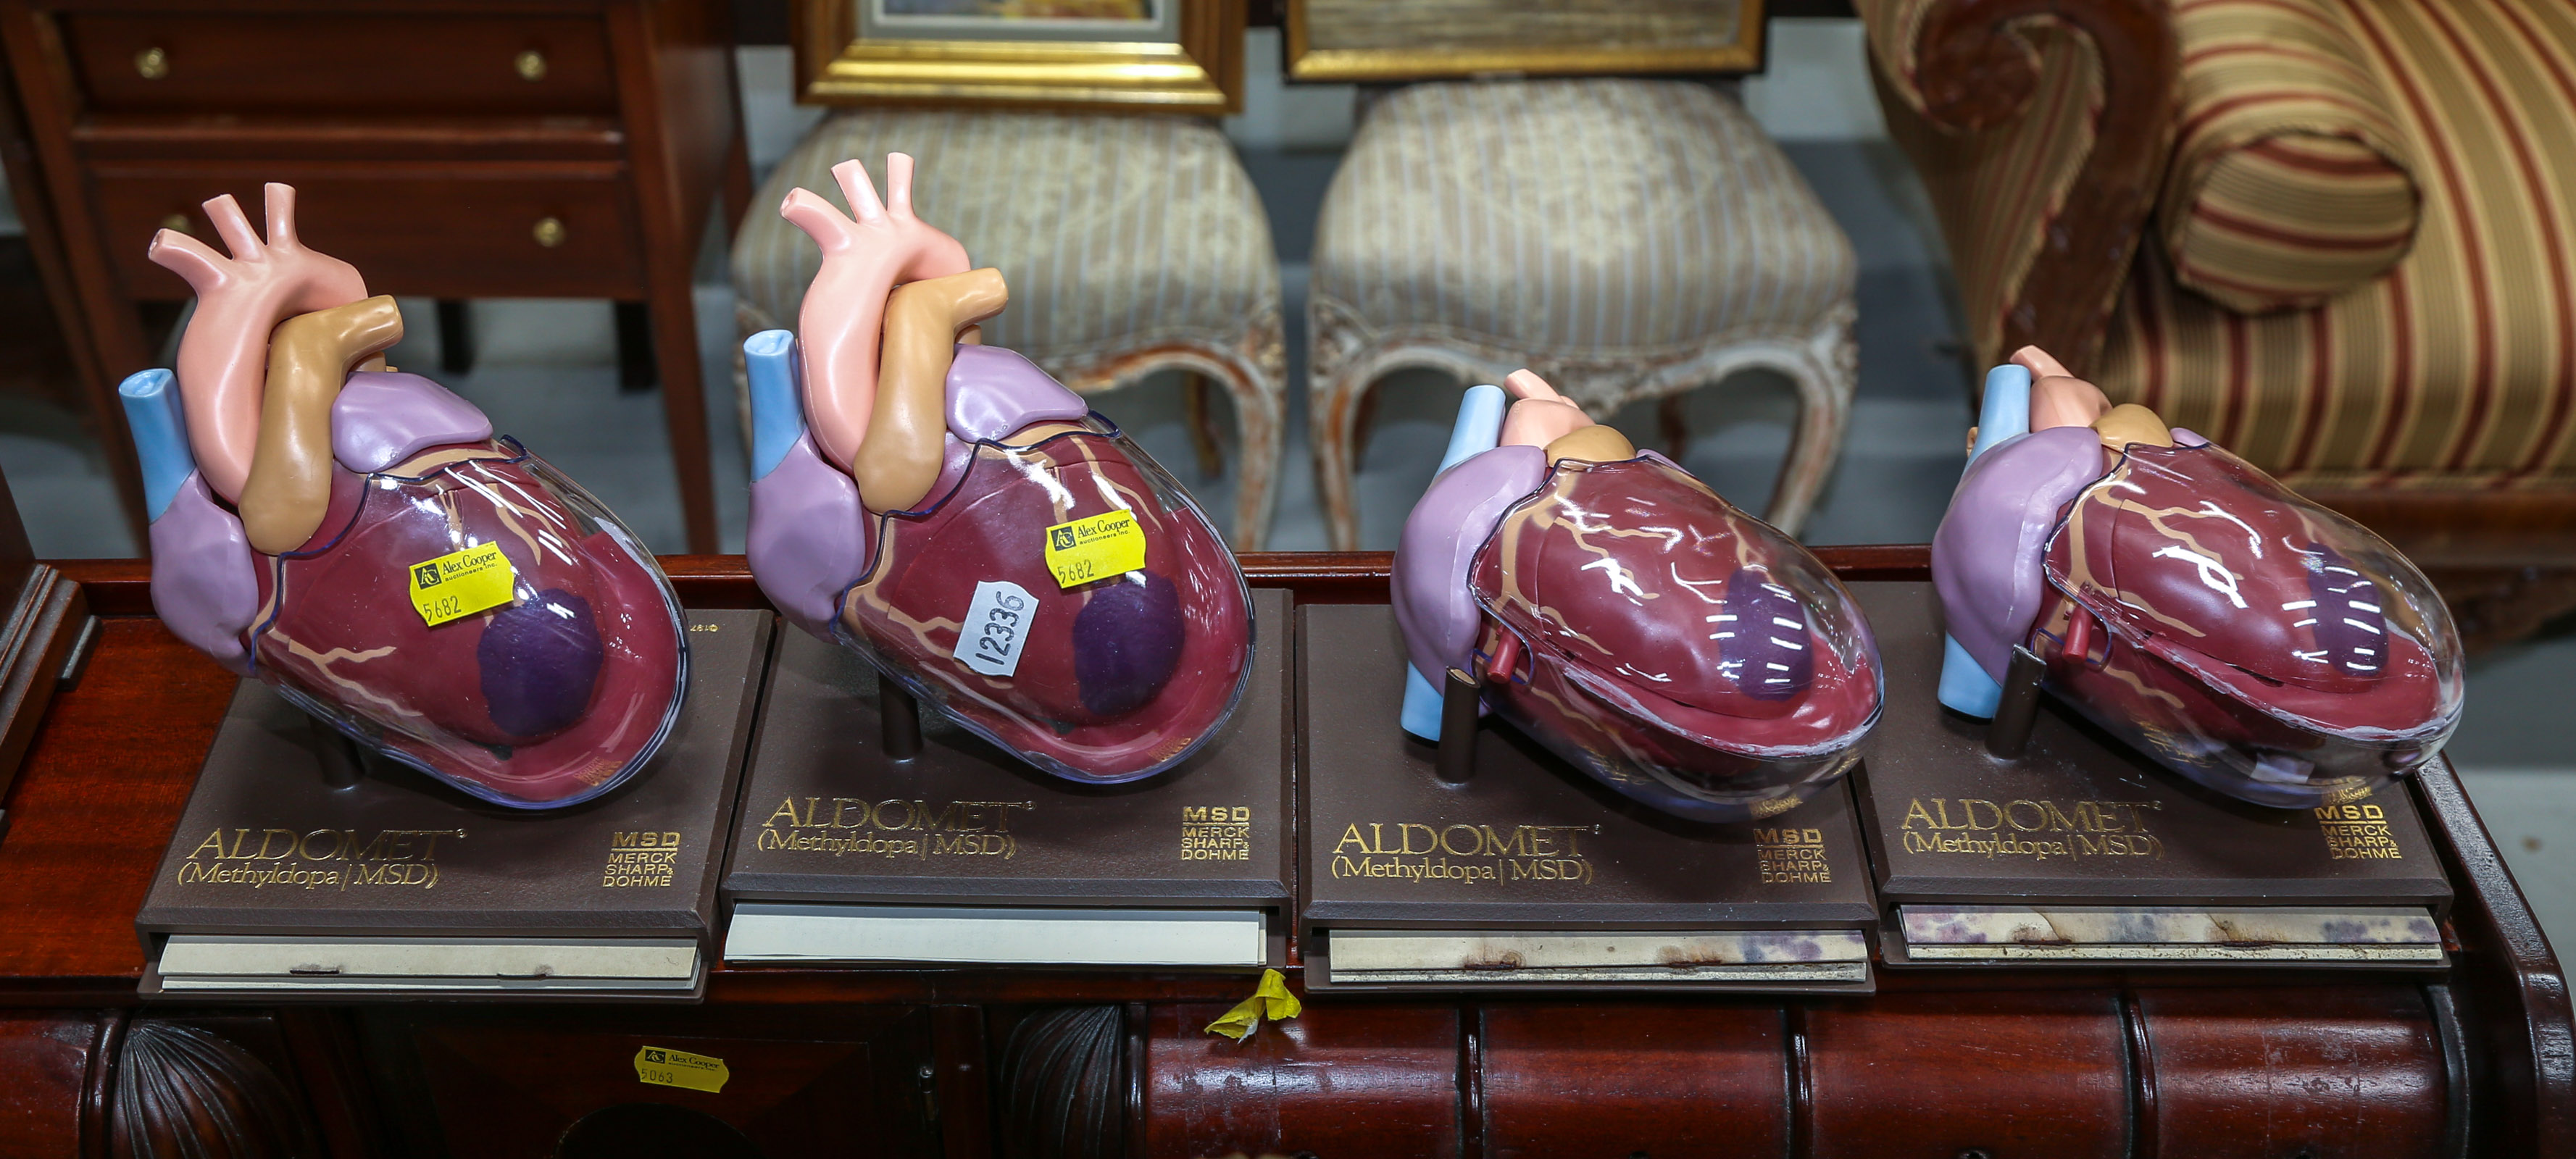 FOUR PROMOTIONAL MODELS OF HEARTS